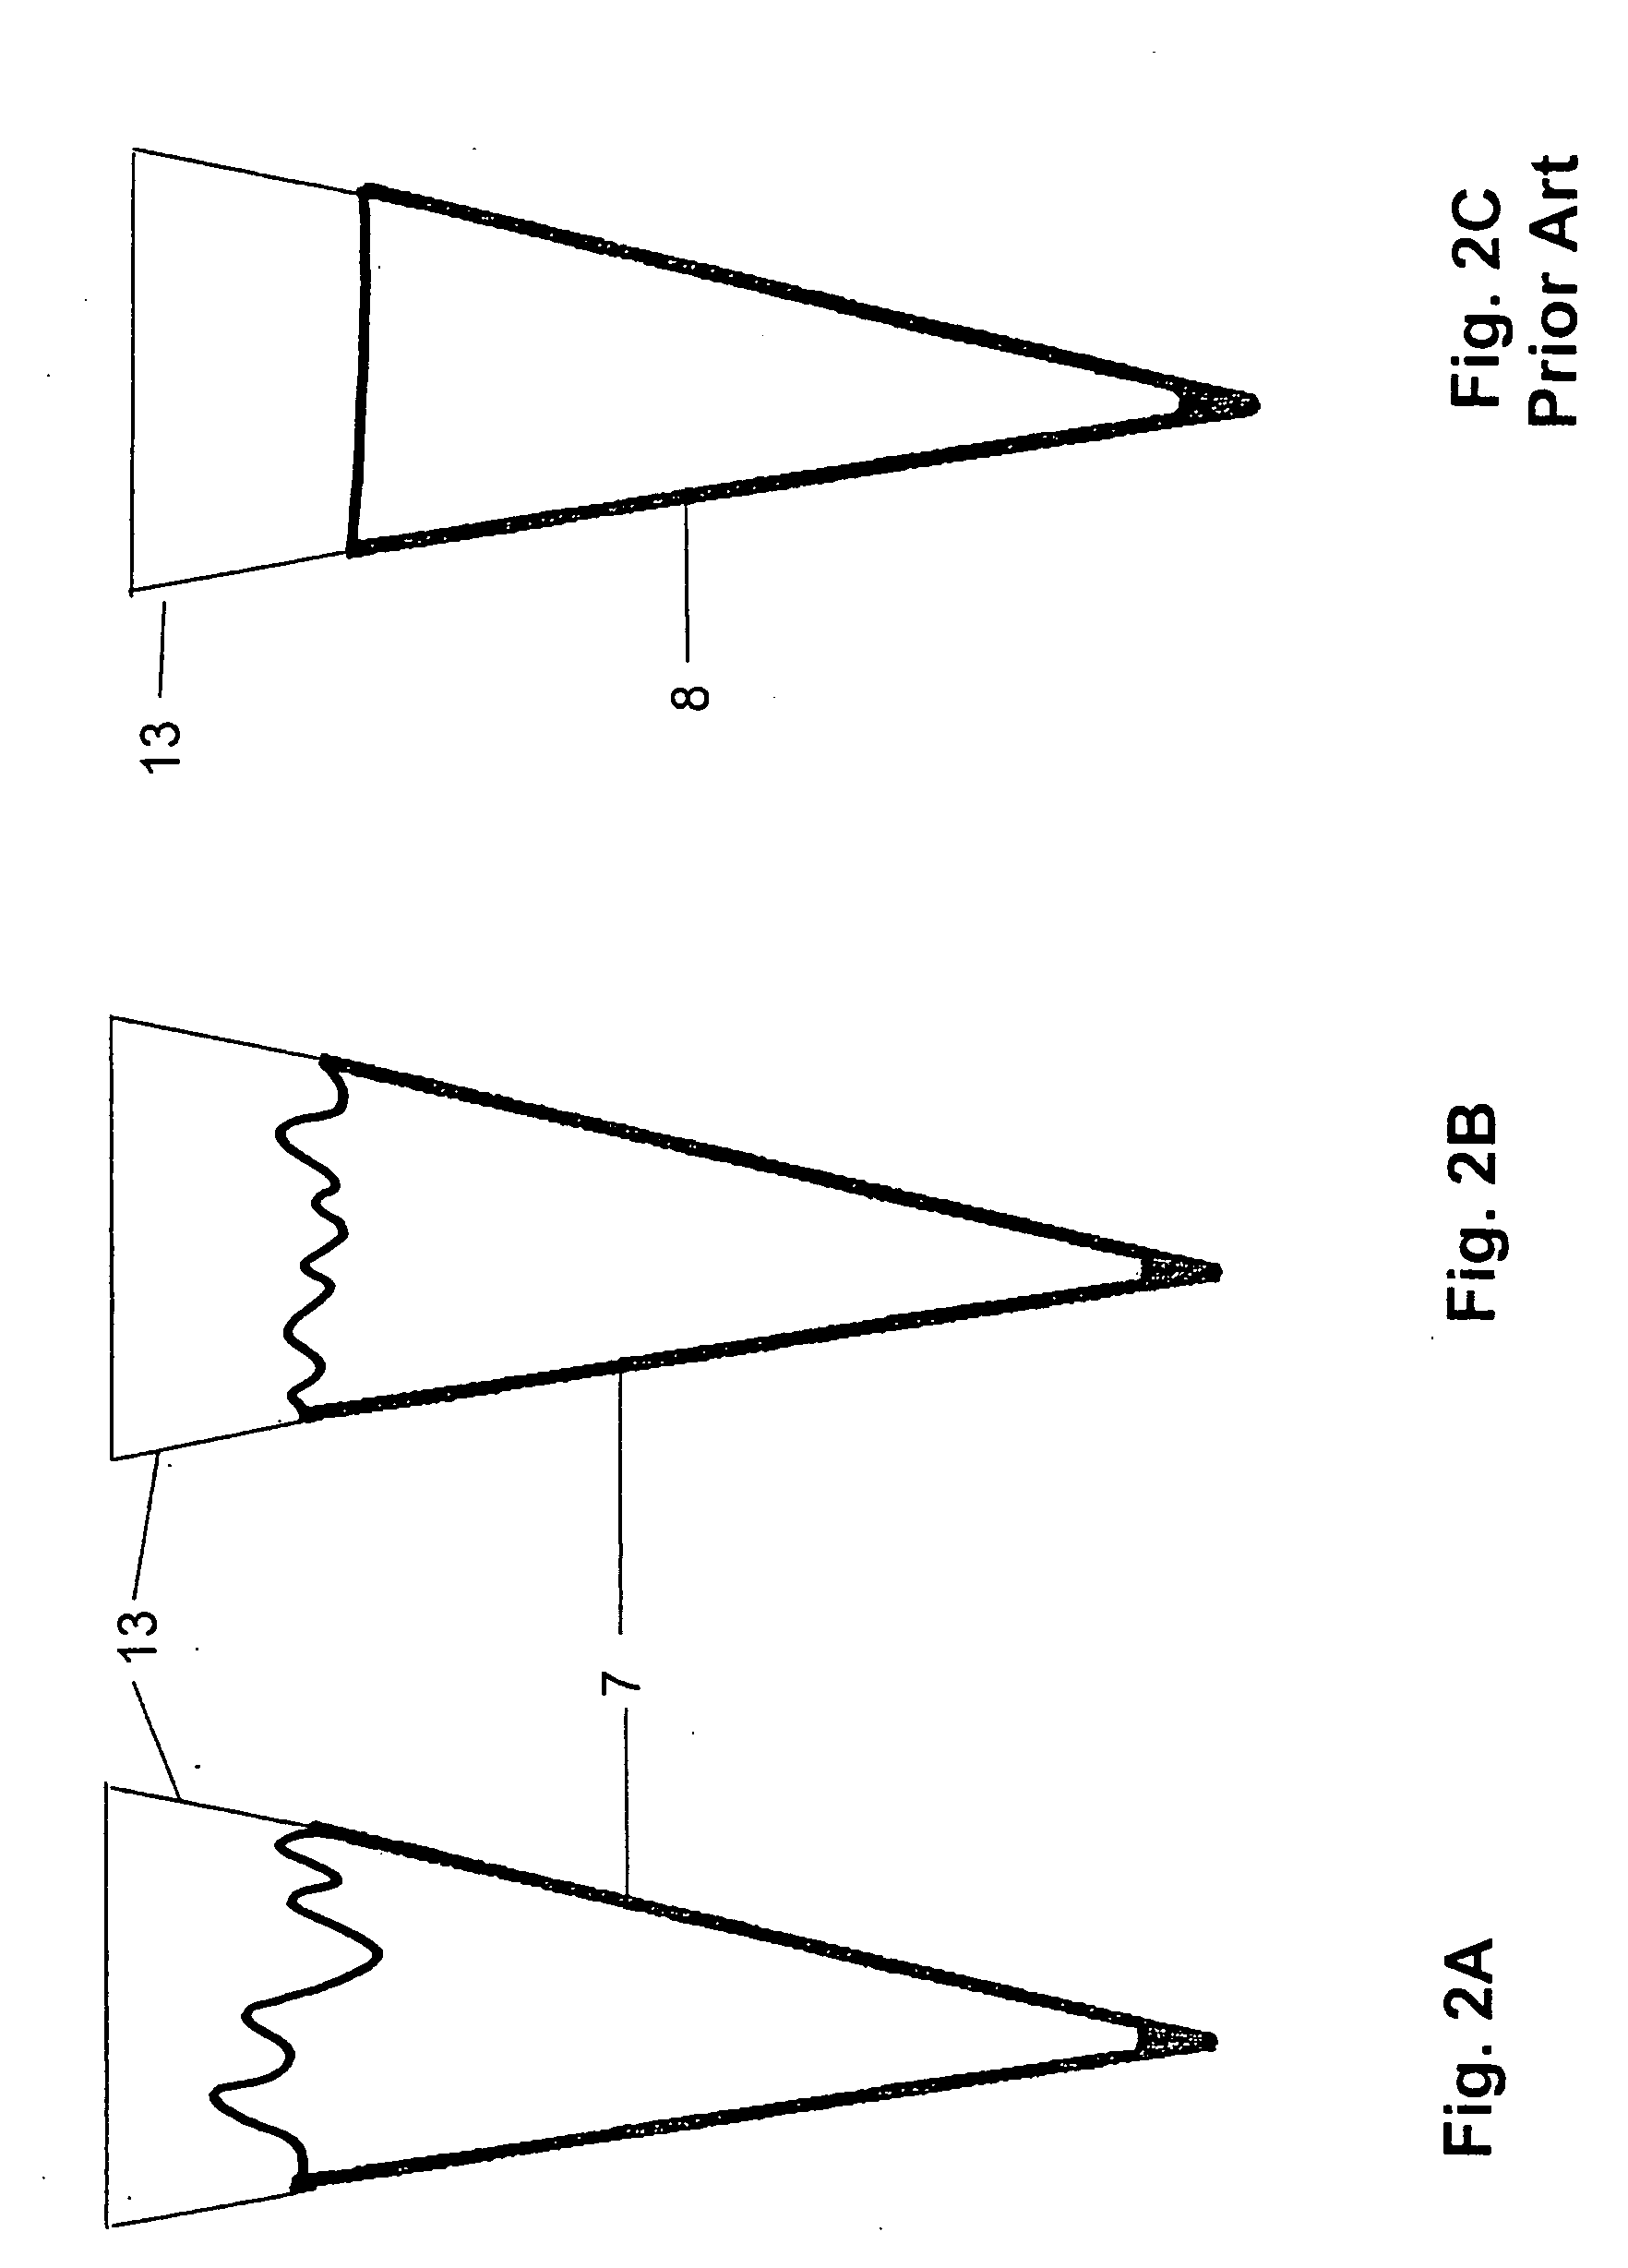 Edible fat-based shell for confectioneries and method for producing same